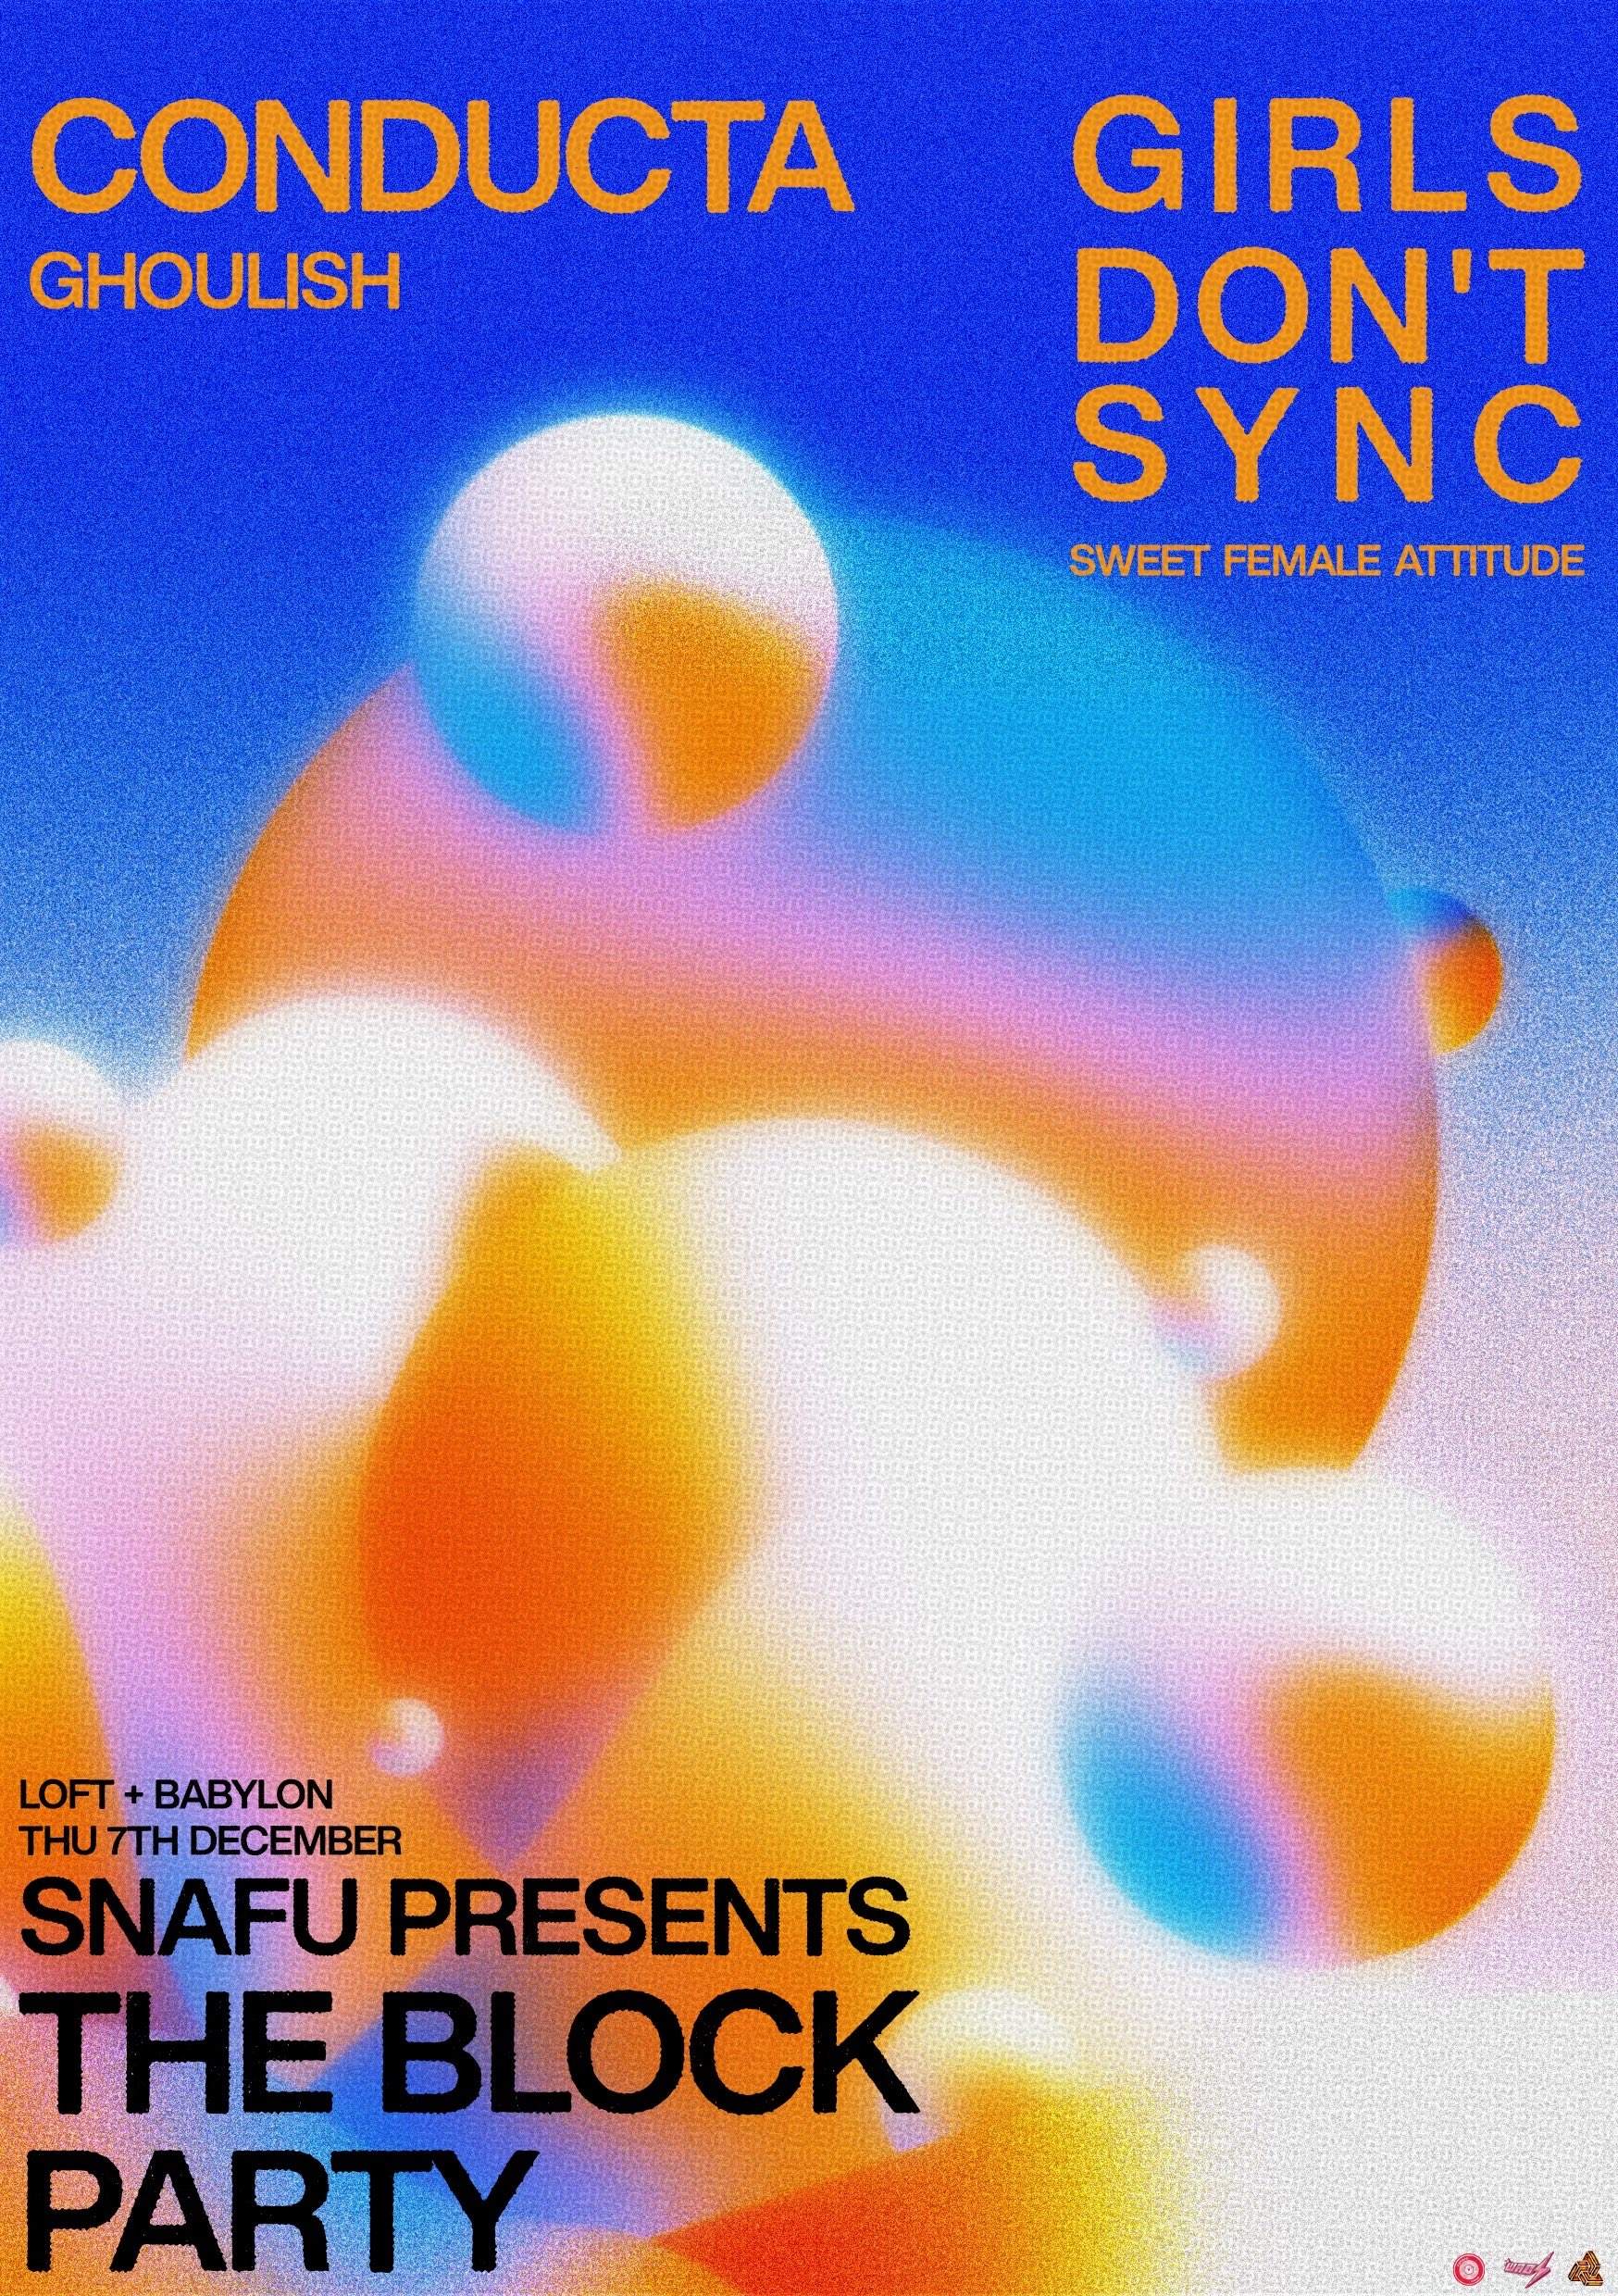 SNAFU #021 // THE BLOCK PARTY [Conducta, GIRLS DON'T SYNC, Ghoulish, Sweet Female Attitude] - フライヤー表